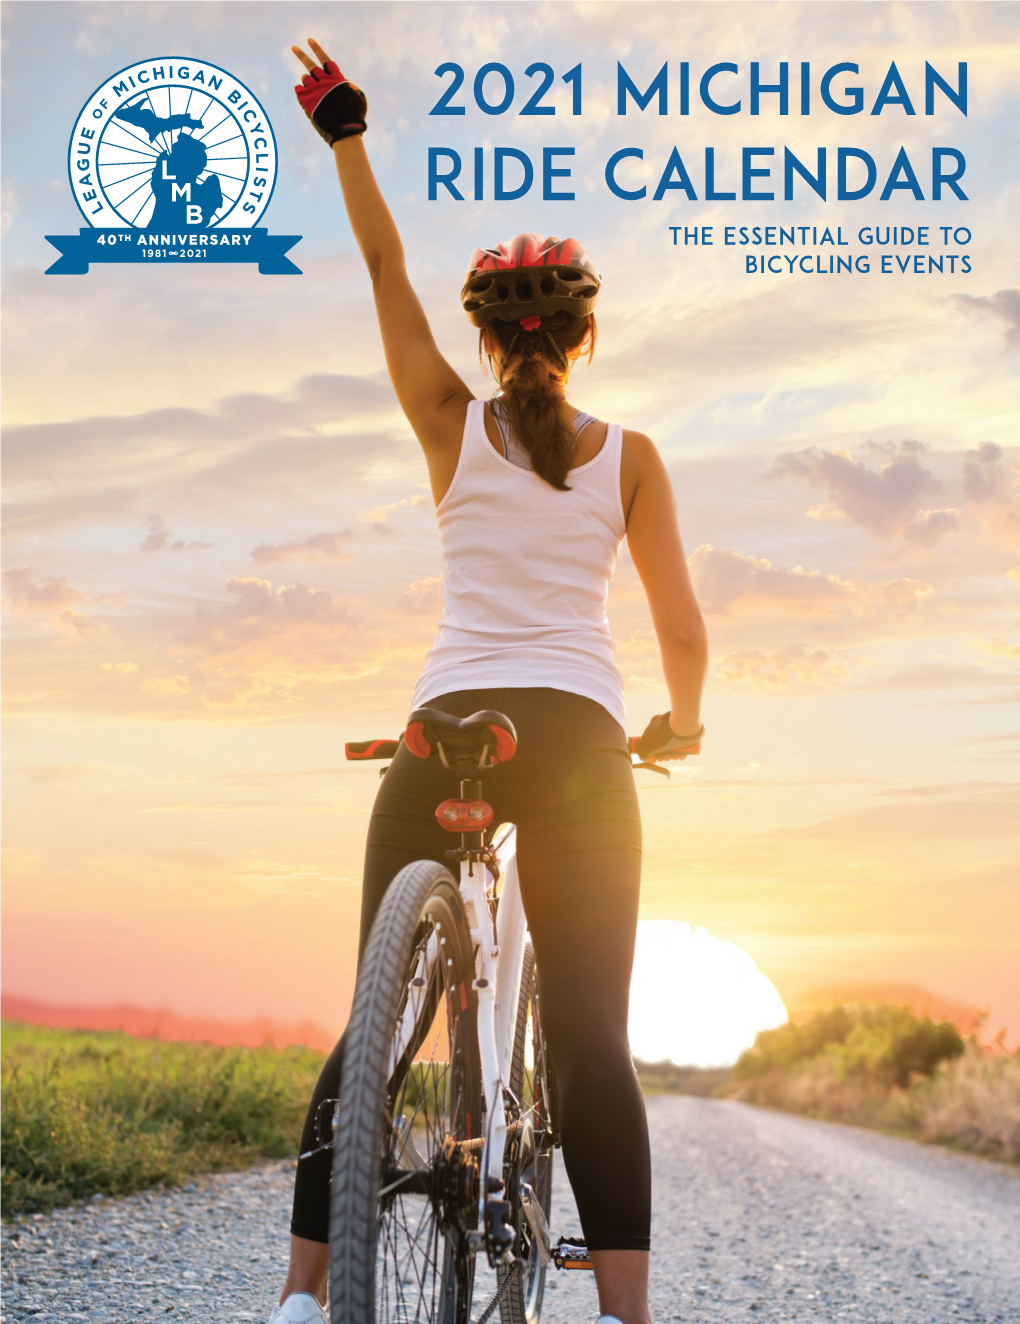 2021 Michigan Ride Calendar the Essential Guide to Bicycling Events